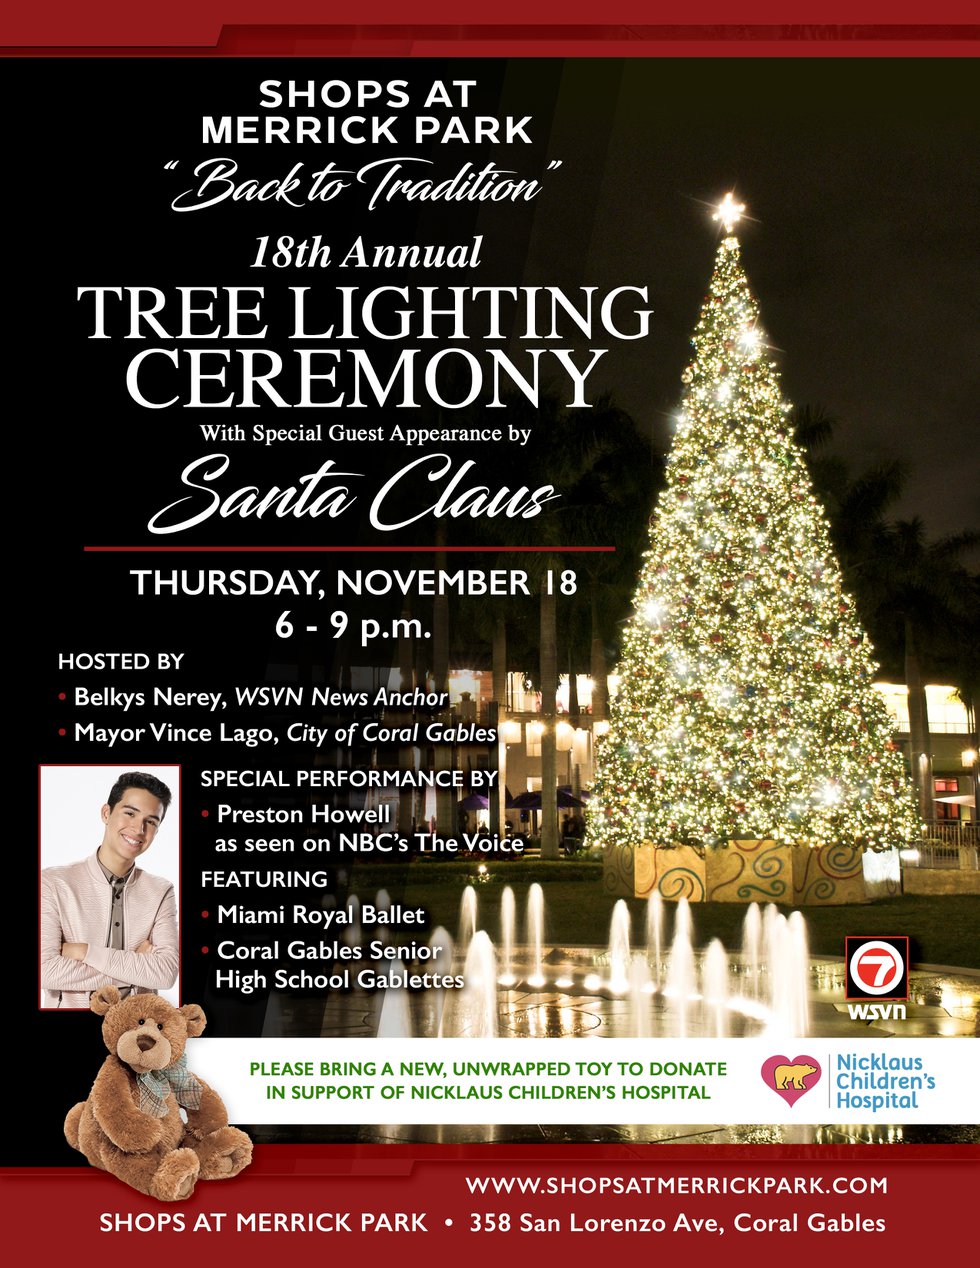 Shops at Merrick Park’s “Back to Tradition” Tree Lighting Ceremony